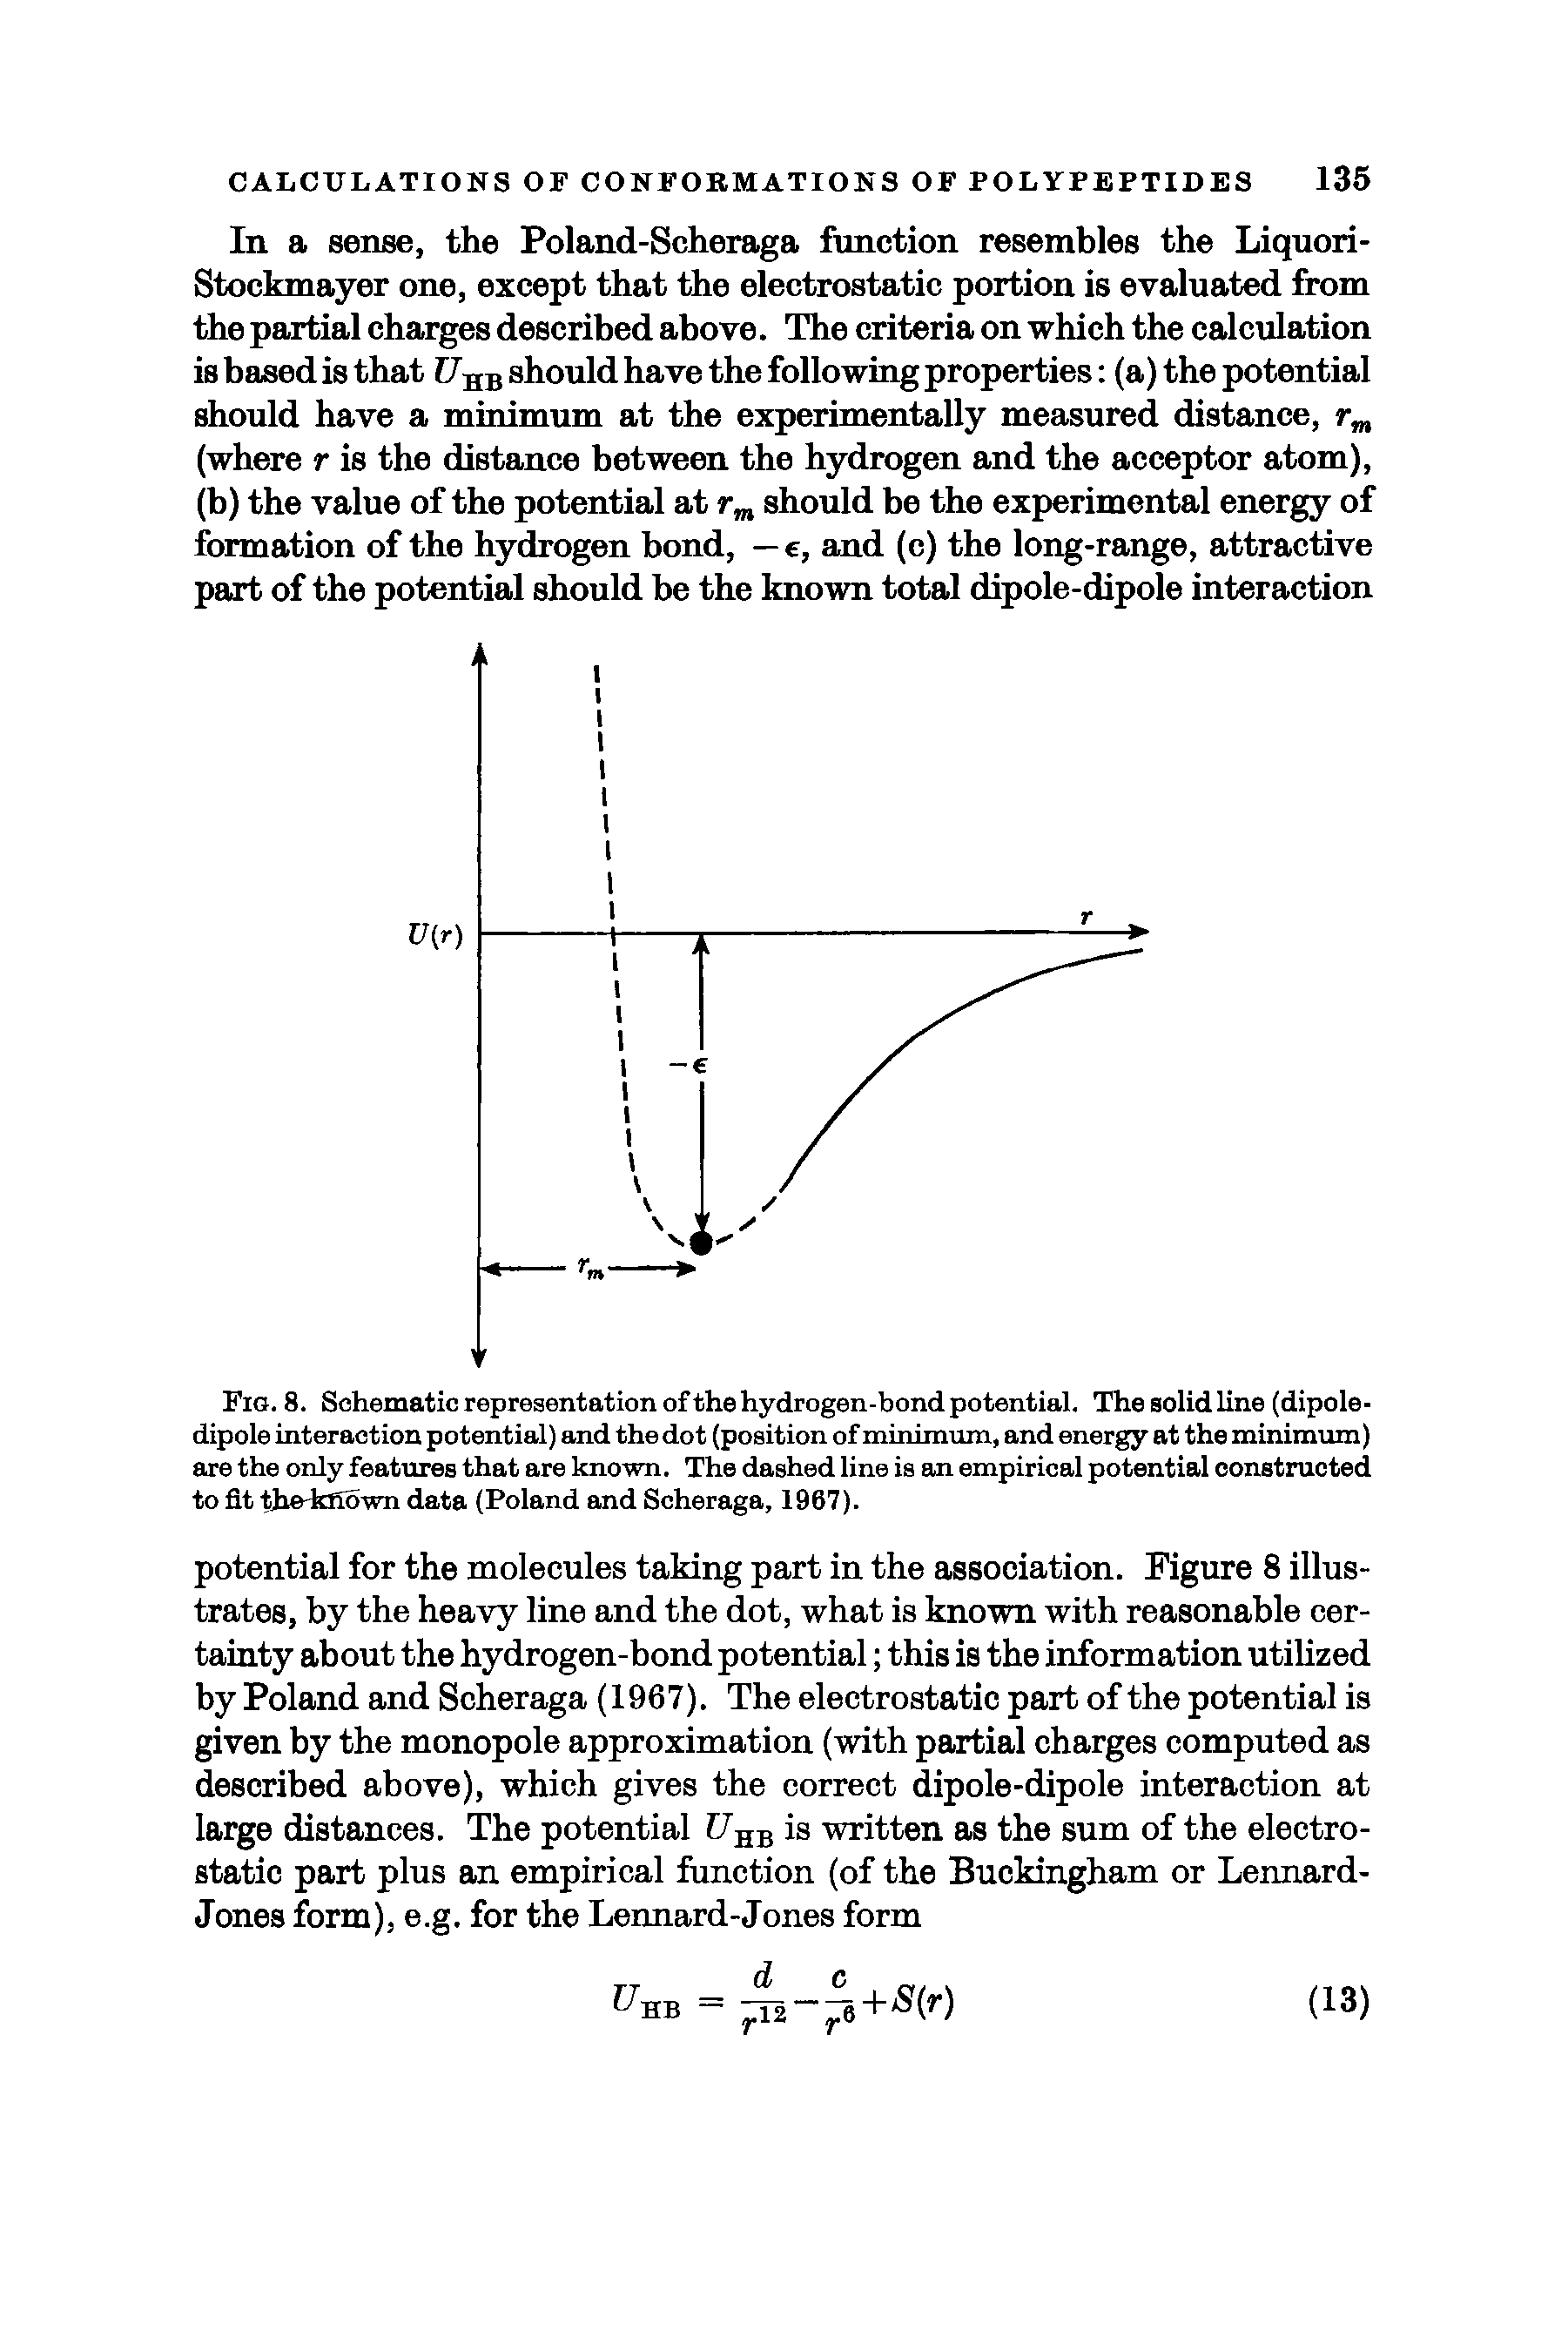 Fig. 8. Schematic representation ofthe hydrogen-bond potential. The solidline (dipole-dipole interaction potential) and the dot (position of minimum, and energy at the minimum) are the only features that are known. The dashed line is an empirical potential constructed to fit tie-known data (Poland and Scheraga, 1967).